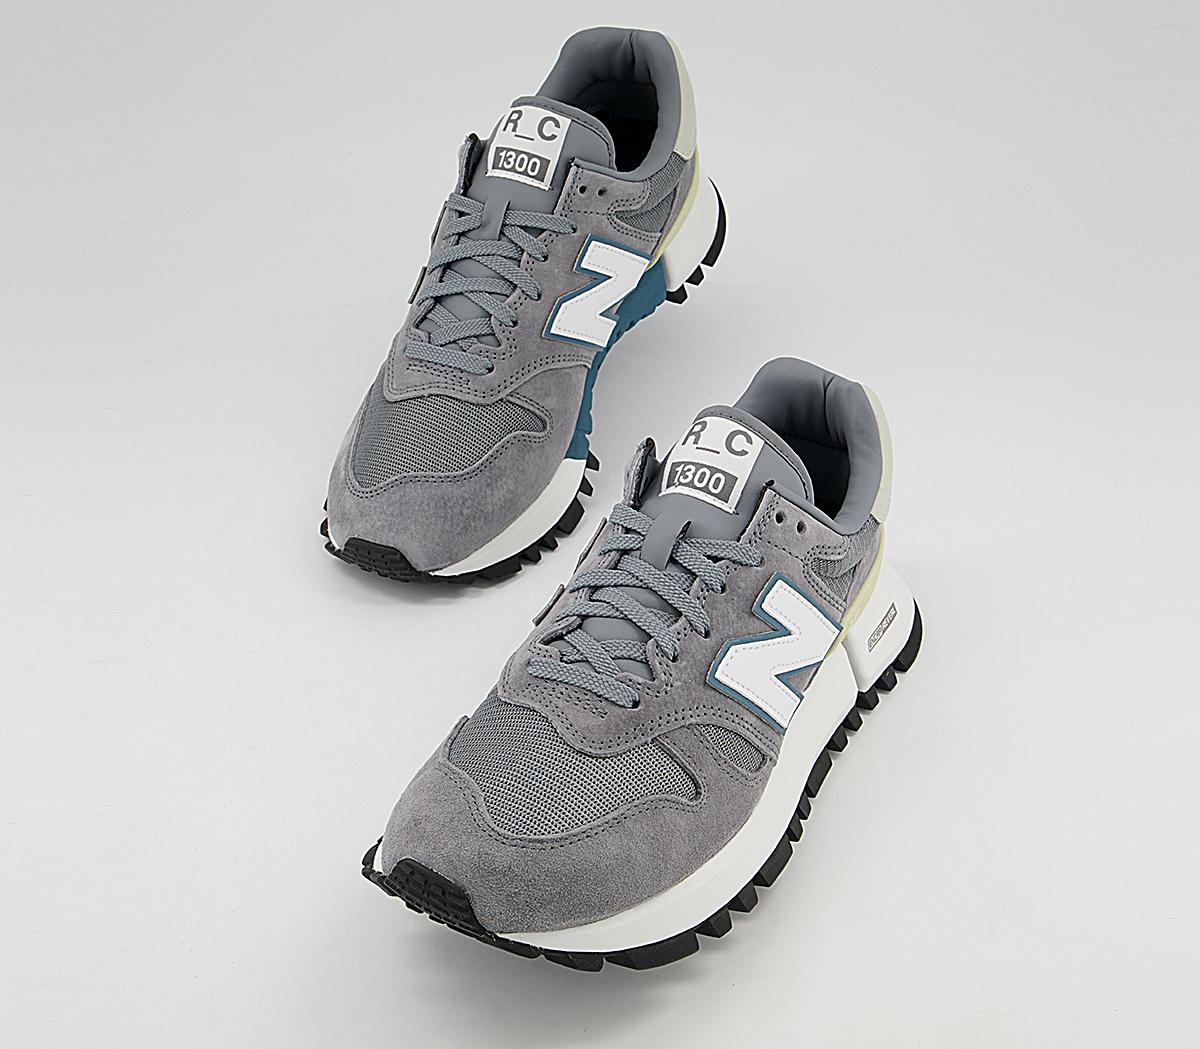 New Balance Rc1300 Trainers Grey Grey - His trainers